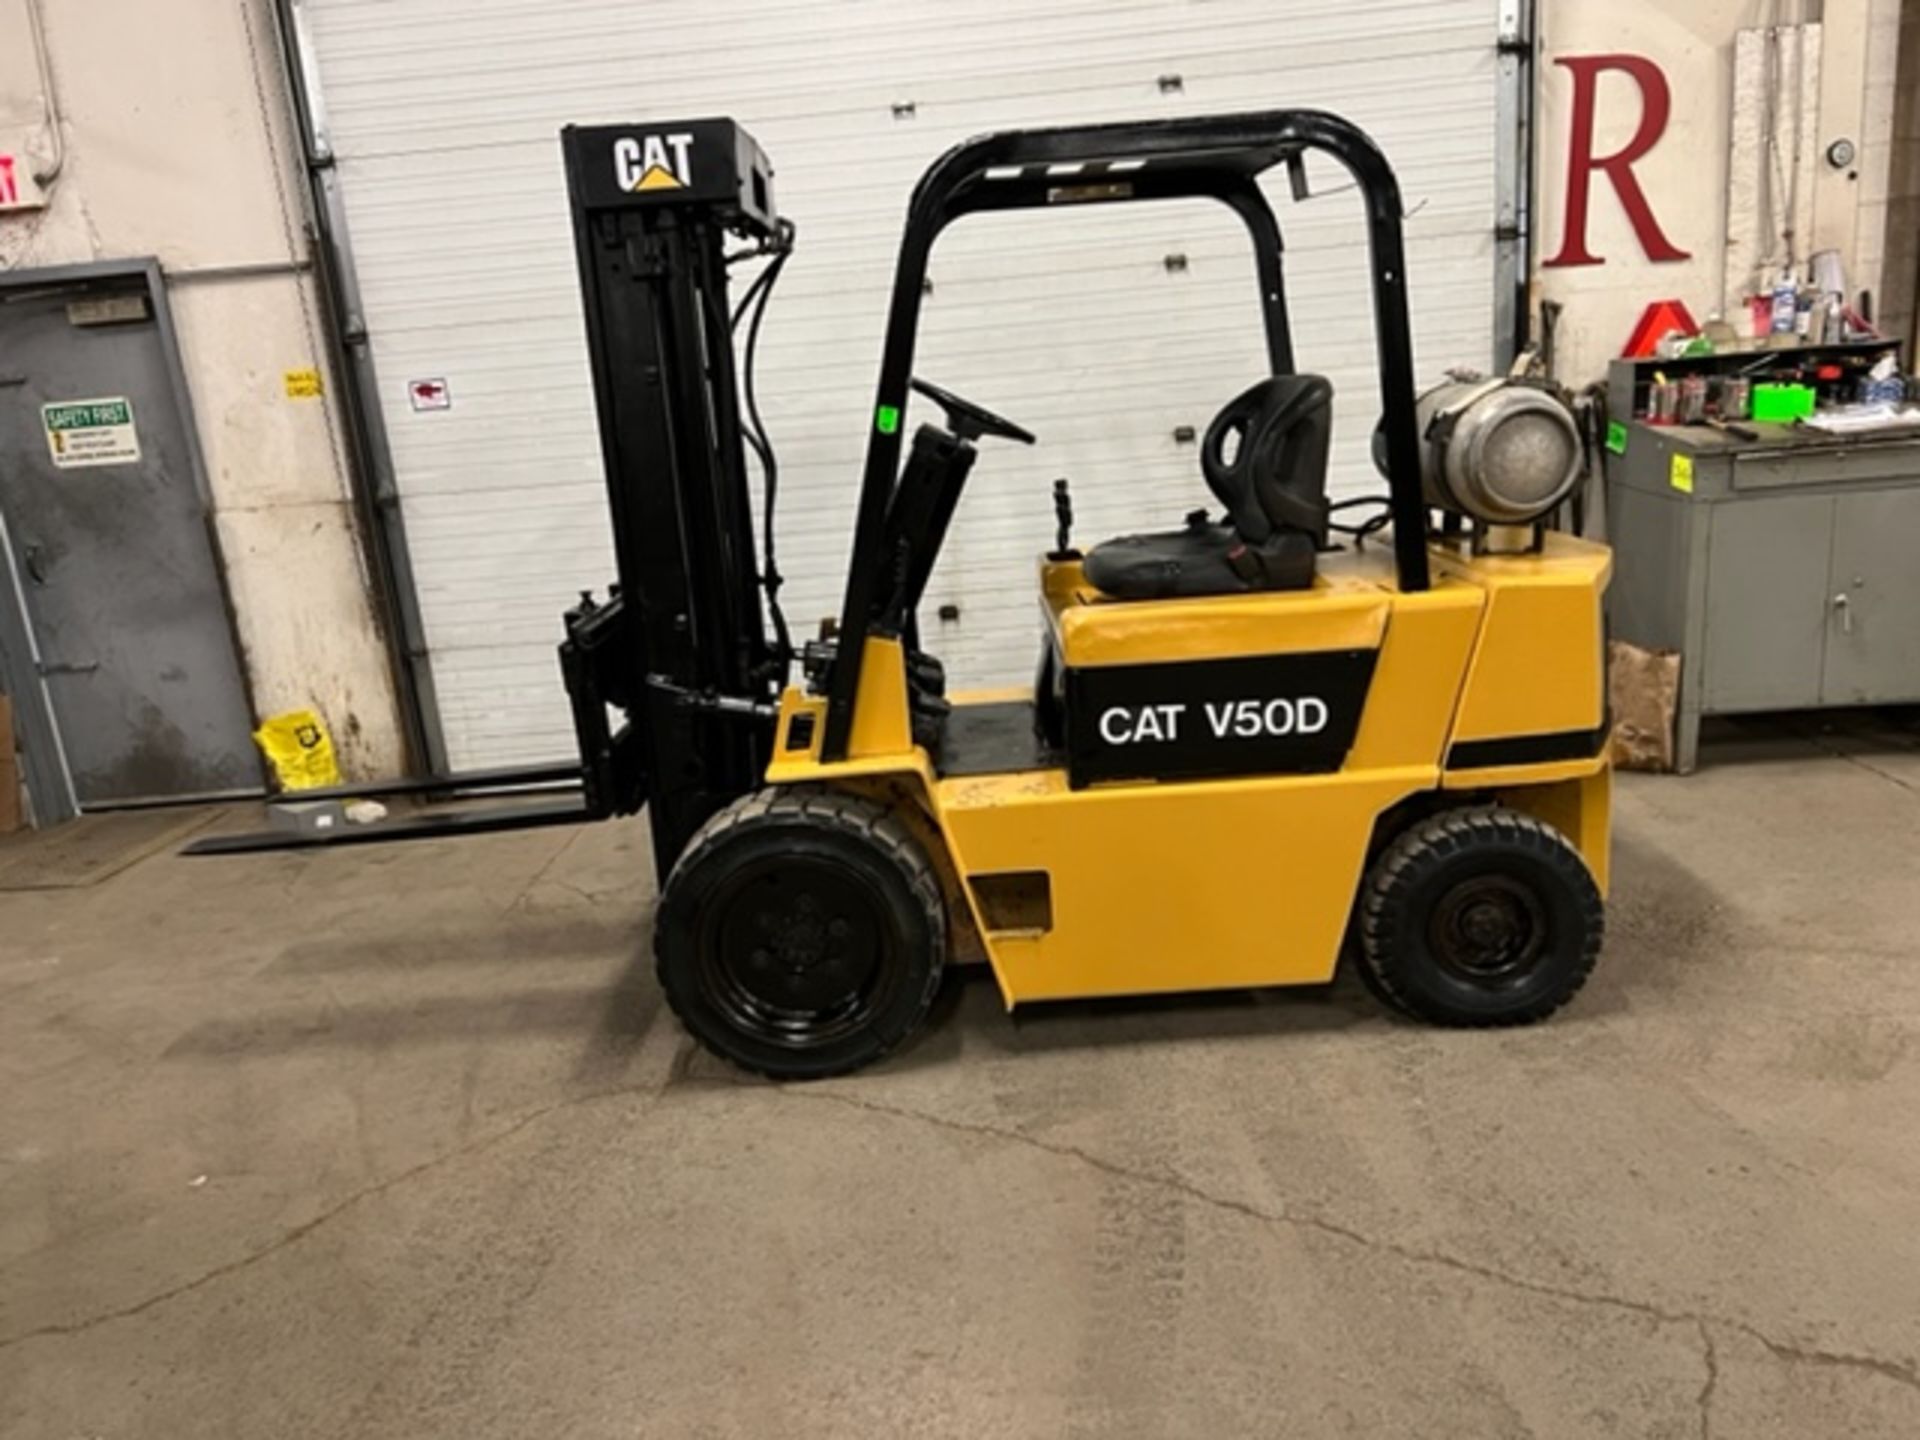 FREE CUSTOMS - CAT model 50 5,000lbs Capacity OUTDOOR Forklift LPG (propane) with SIDESHIFT